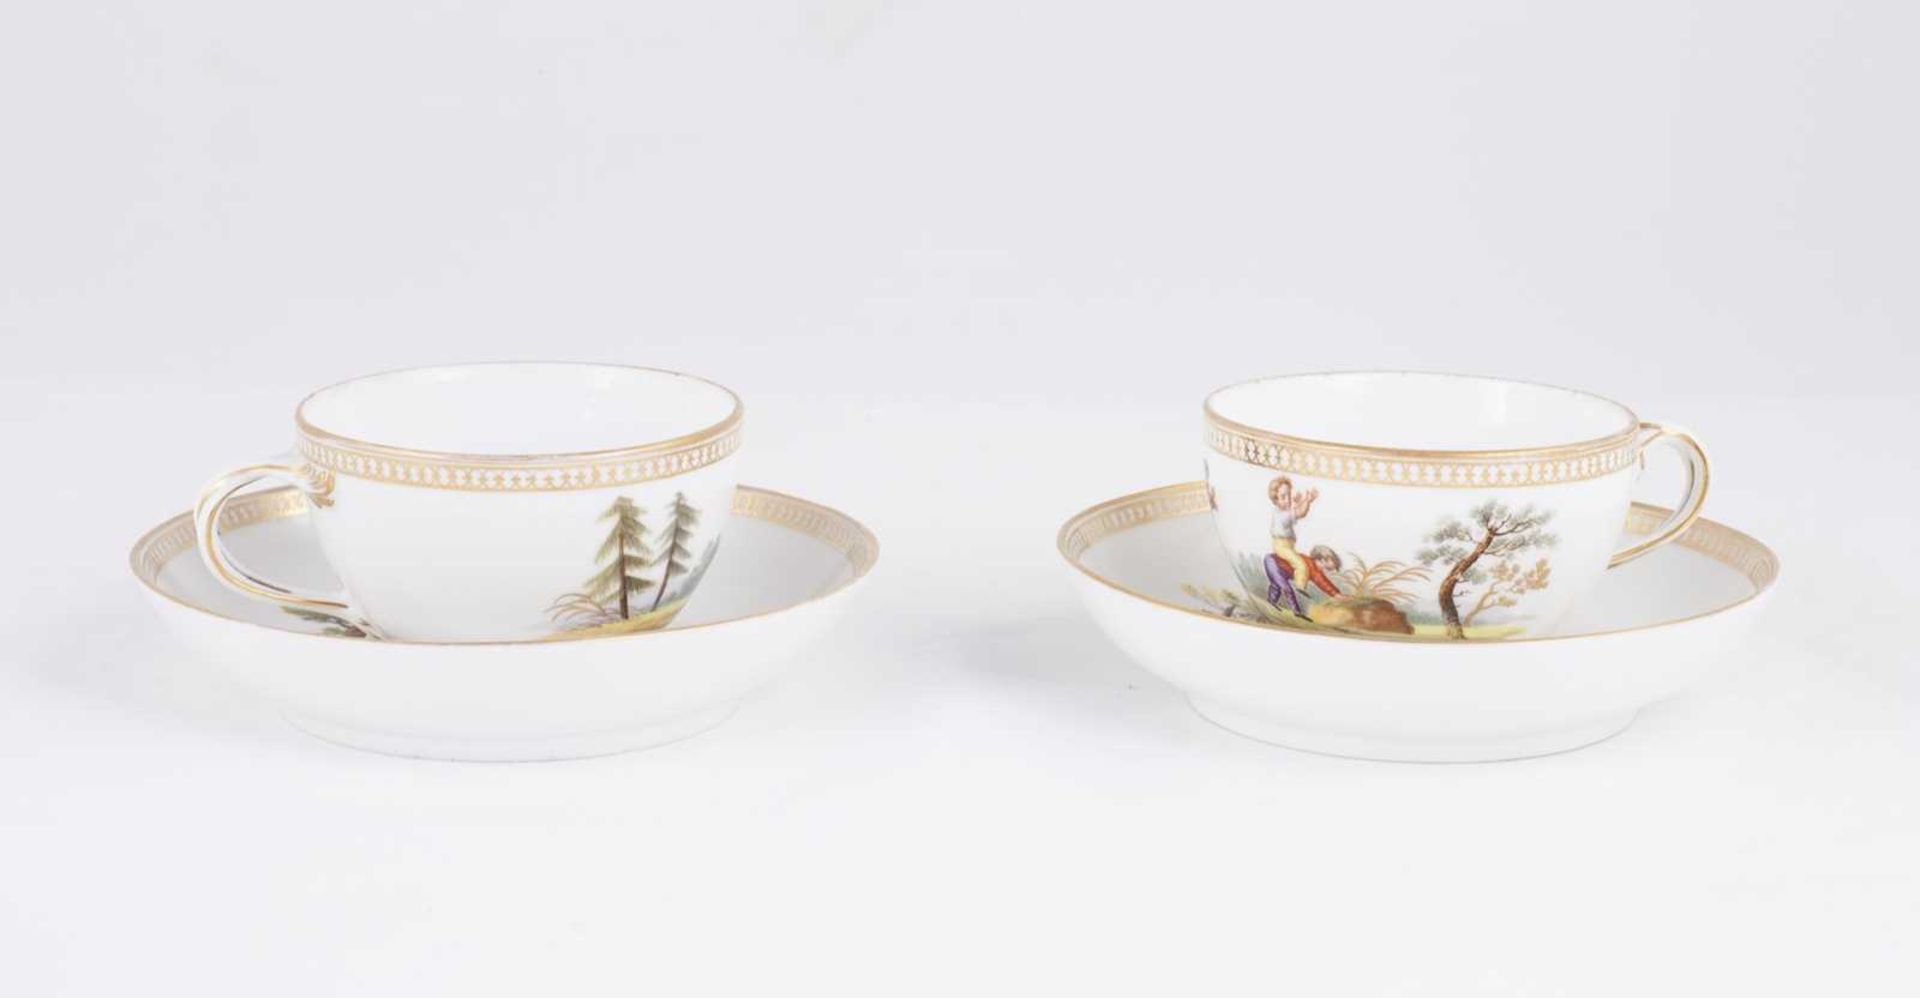 Two tea cup and saucer sets "A child's play". Popov. Moscow. 1850s. Porcelain, gilding, painting.